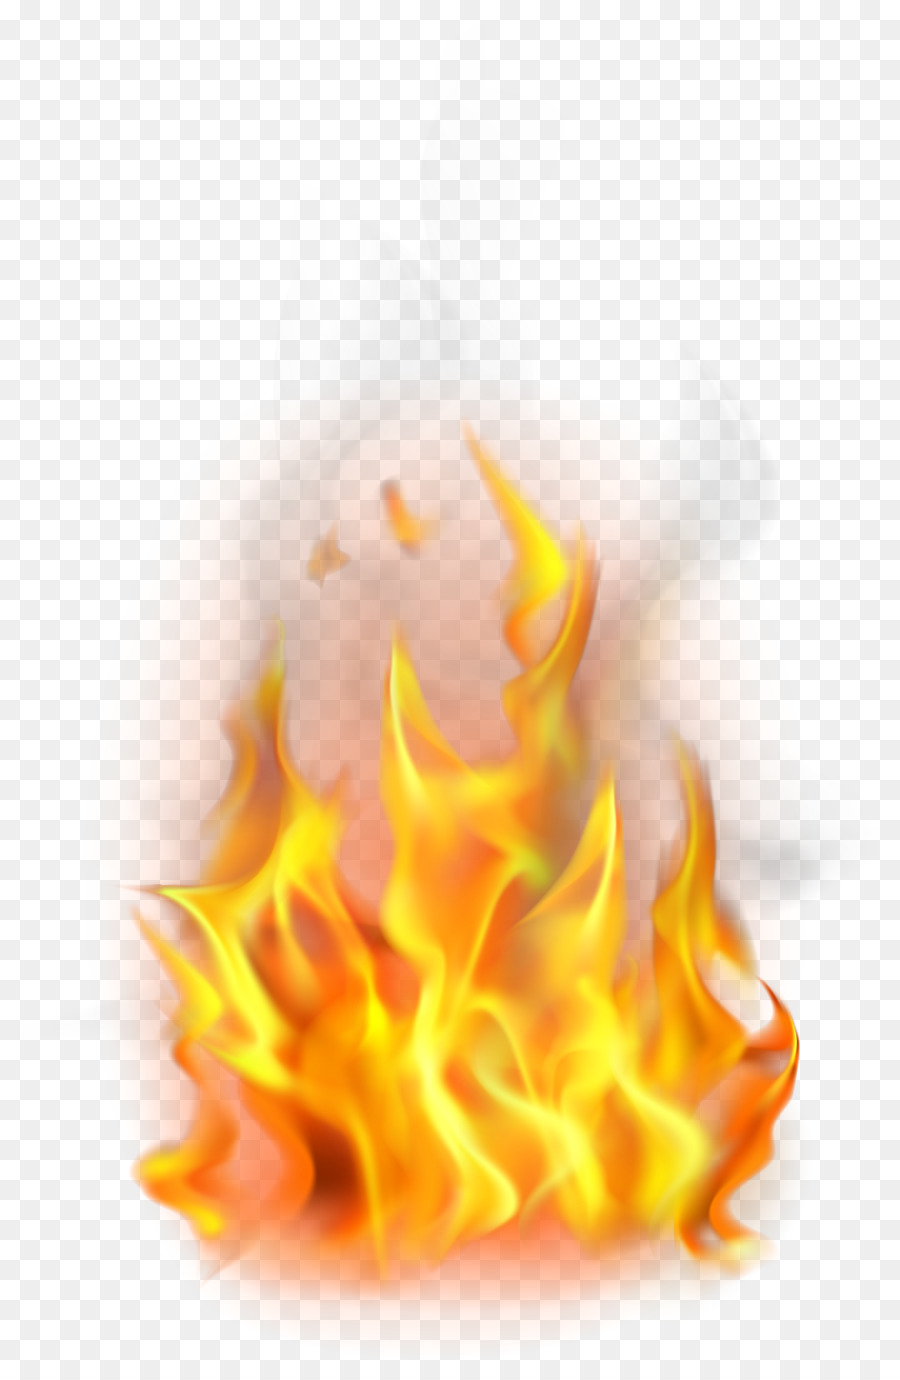 Portable Network Graphics Clip art Image Fire Flame - fire png download